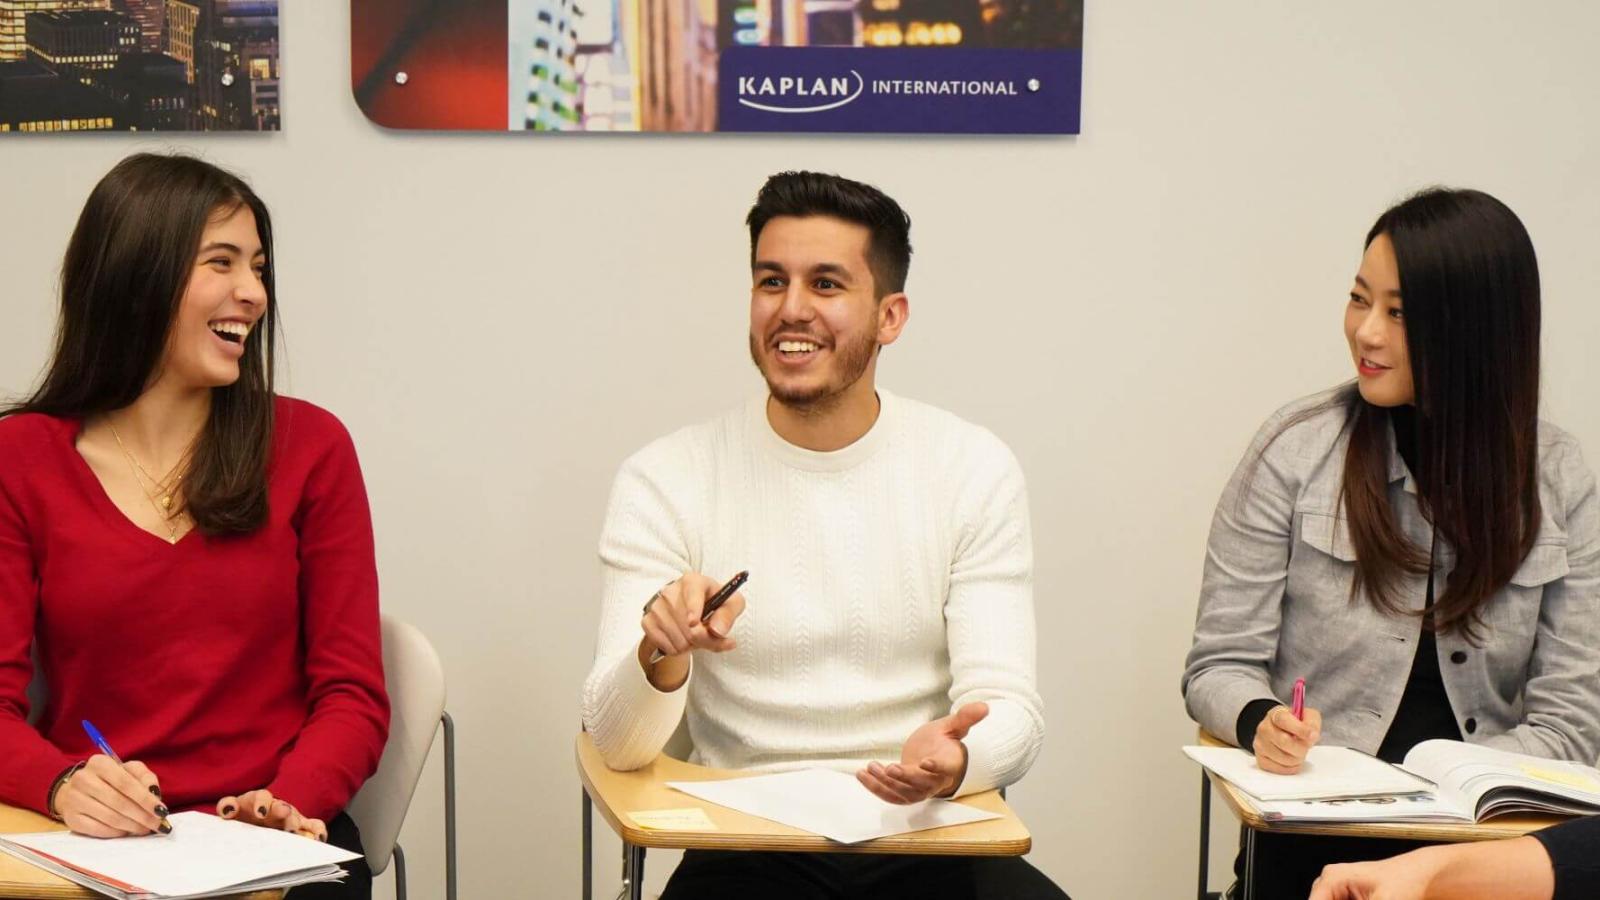 kaplan english courses for adults